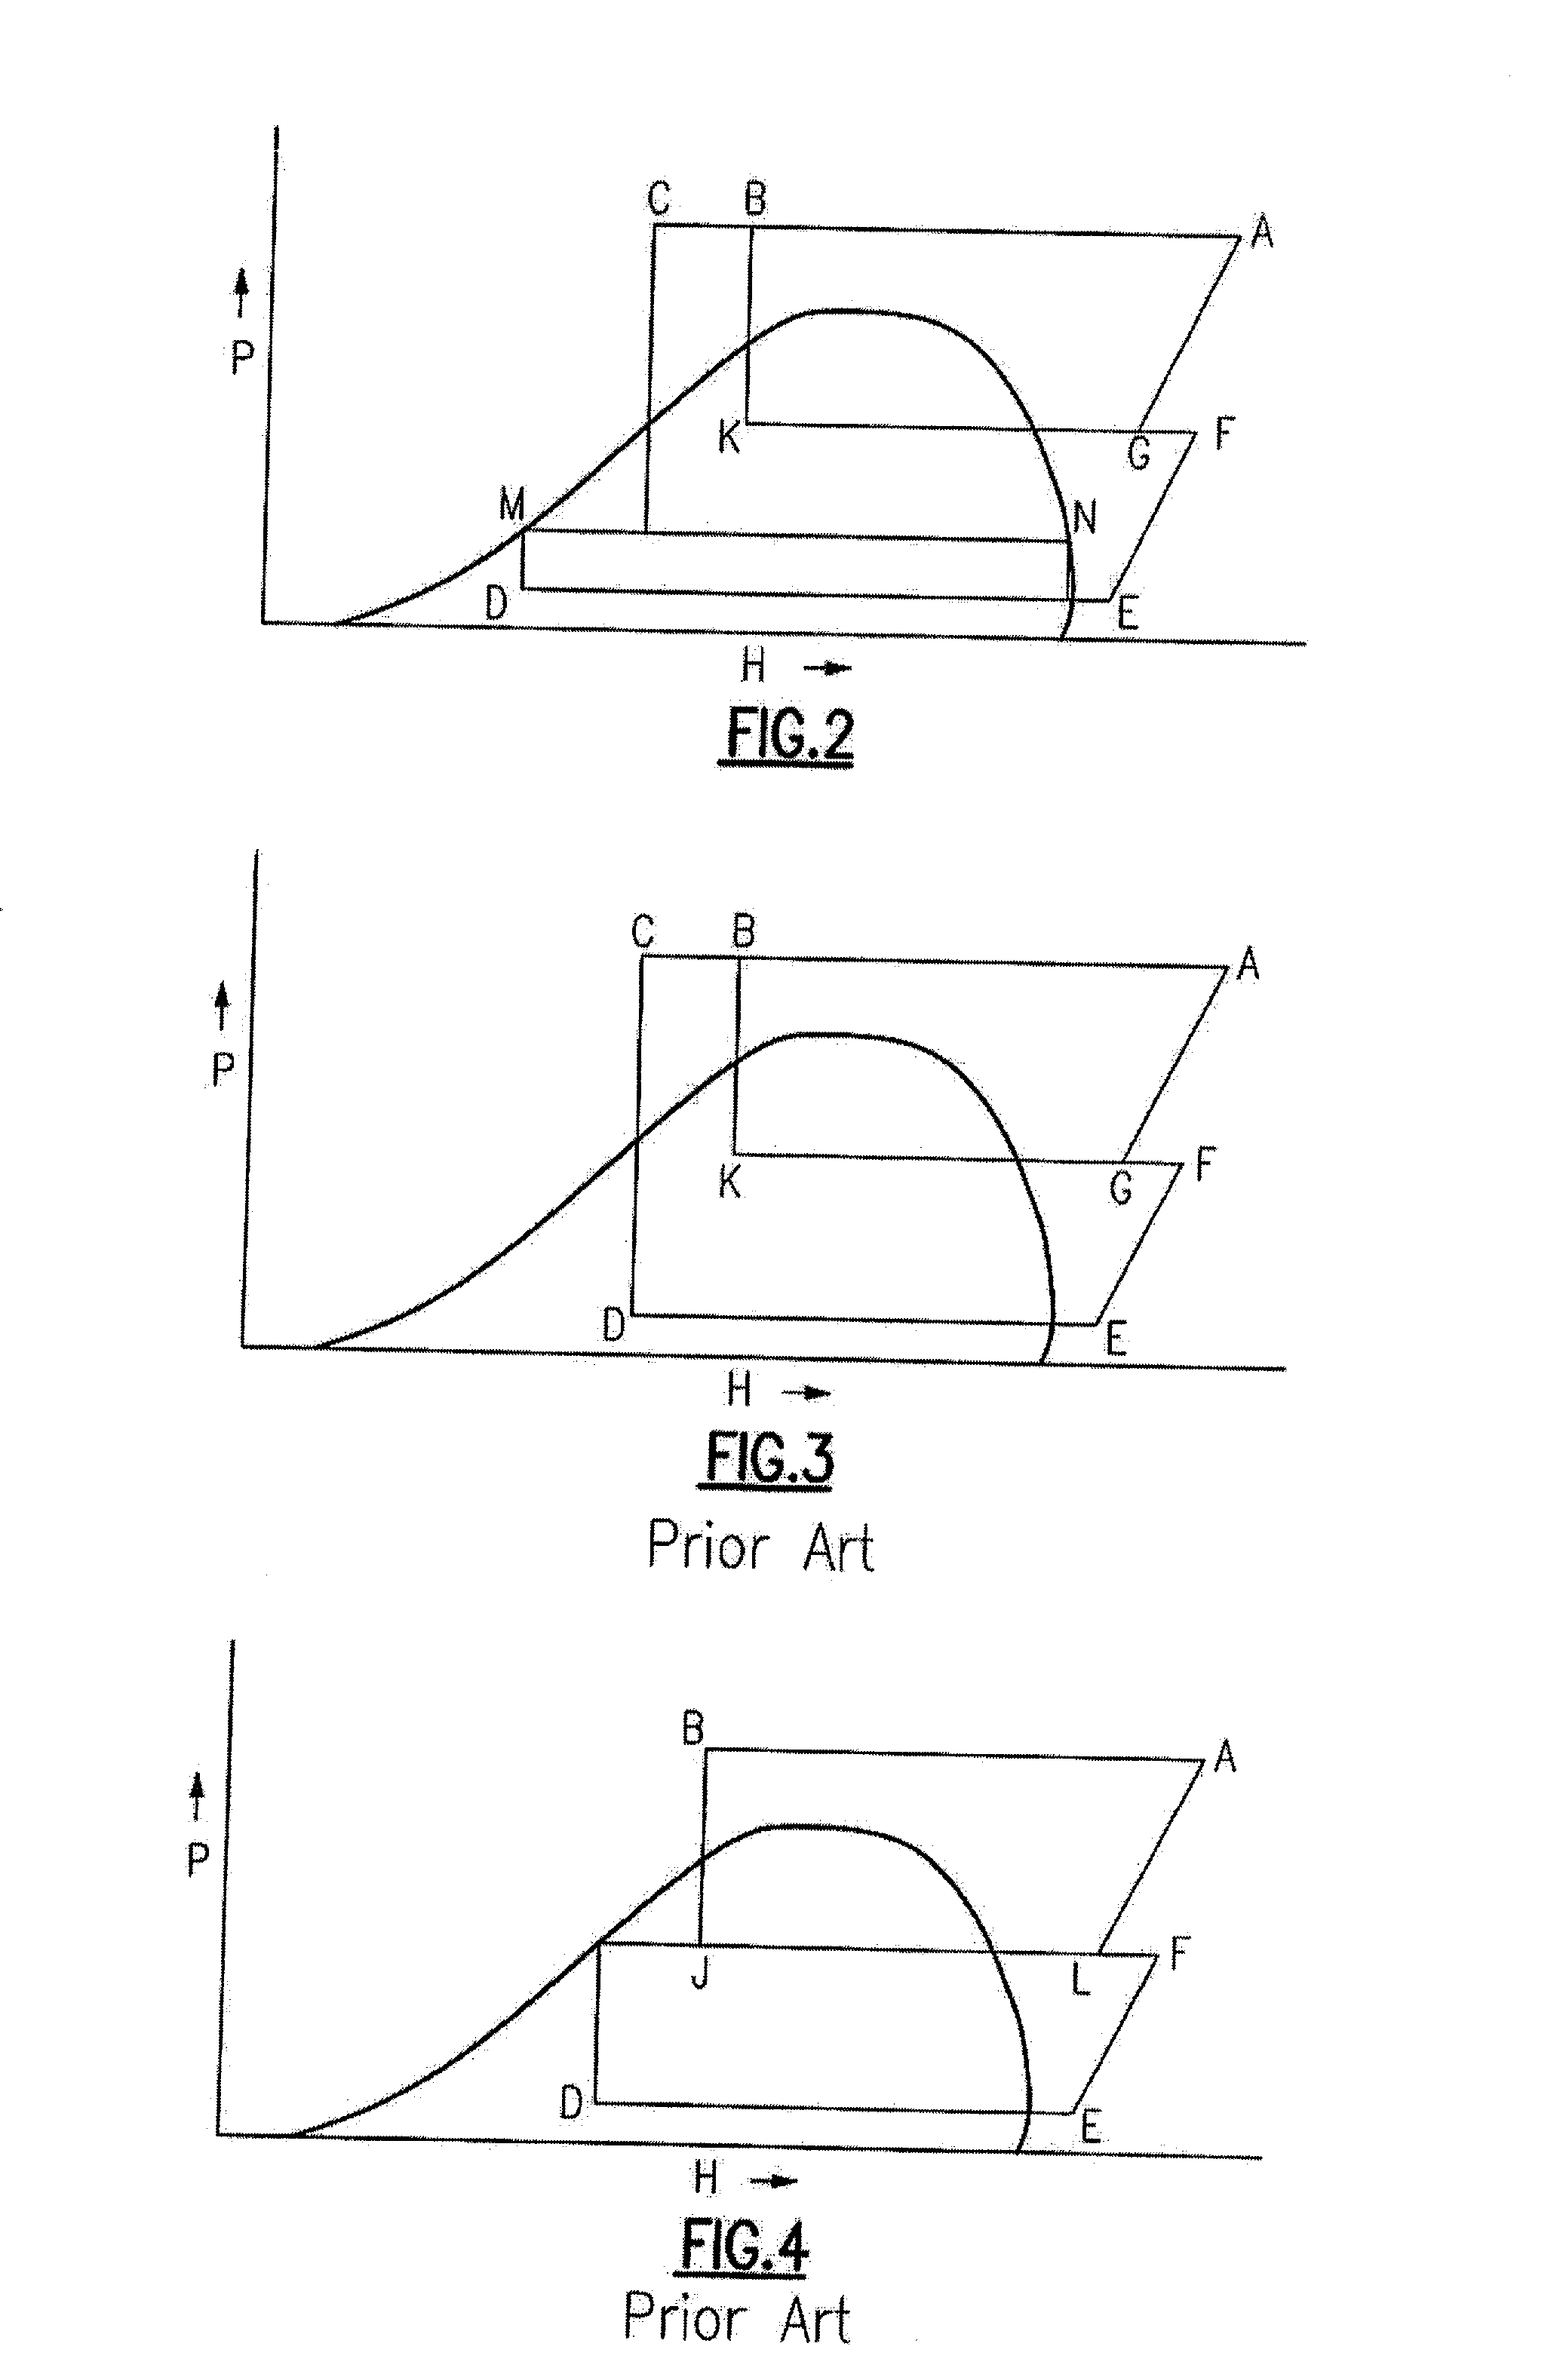 Transcritical refrigerant vapor compression system with charge management